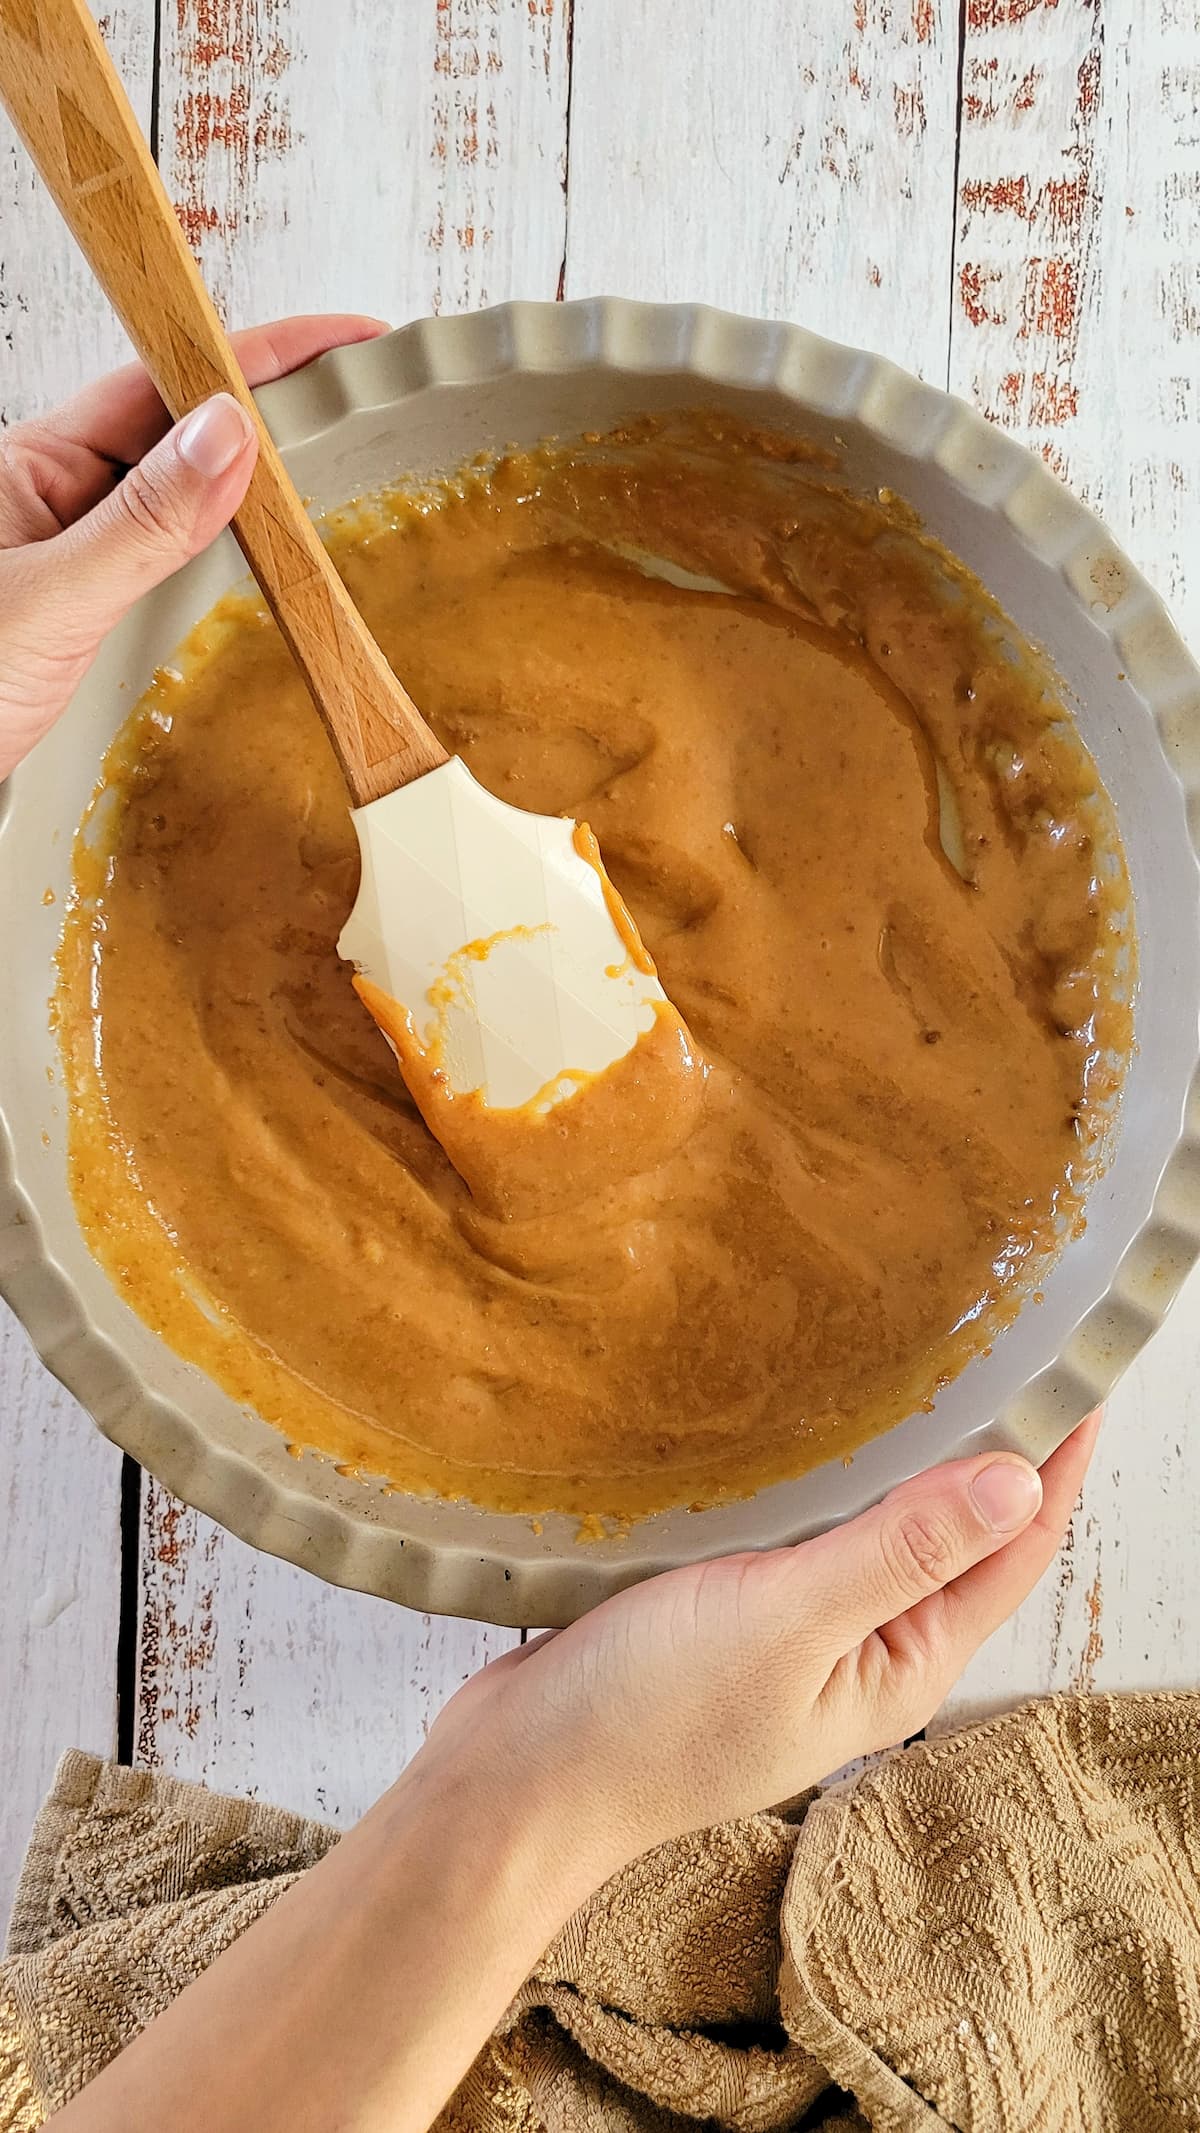 hands holding a dish with homemade caramel sauce and a rubber spatula